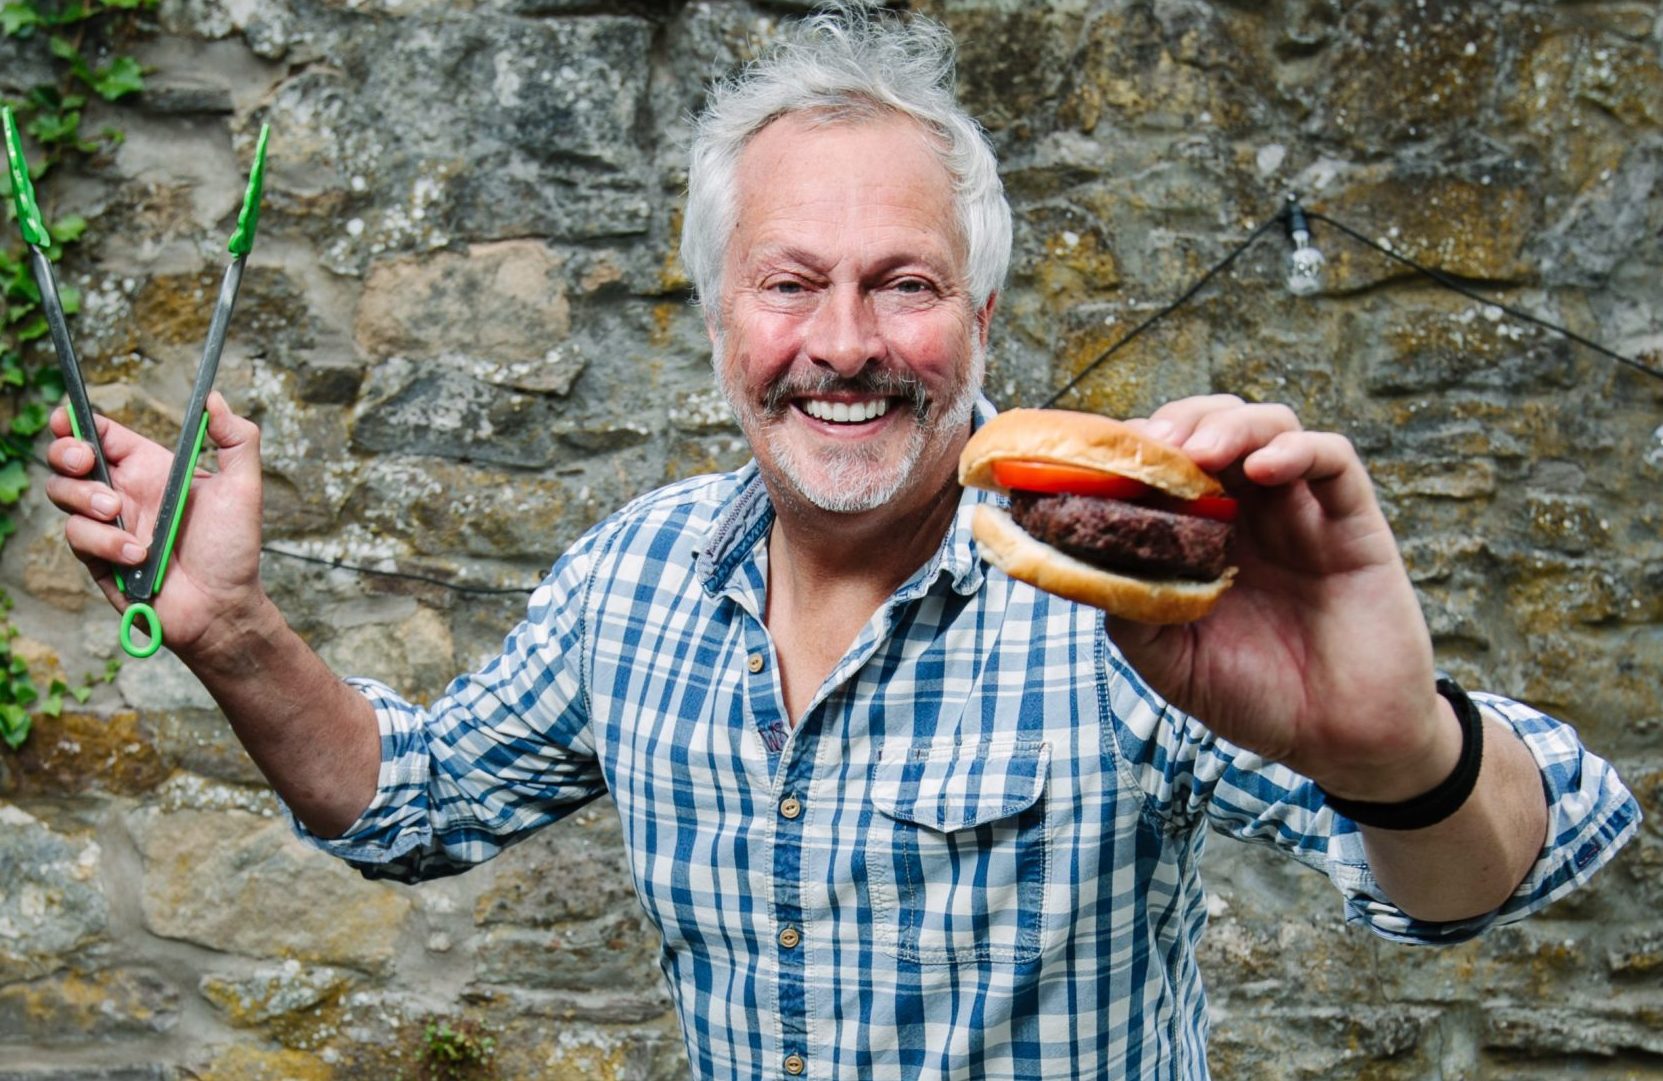 Nick Nairn cooks up another treat on his barbecue at home in Bridge of Allan